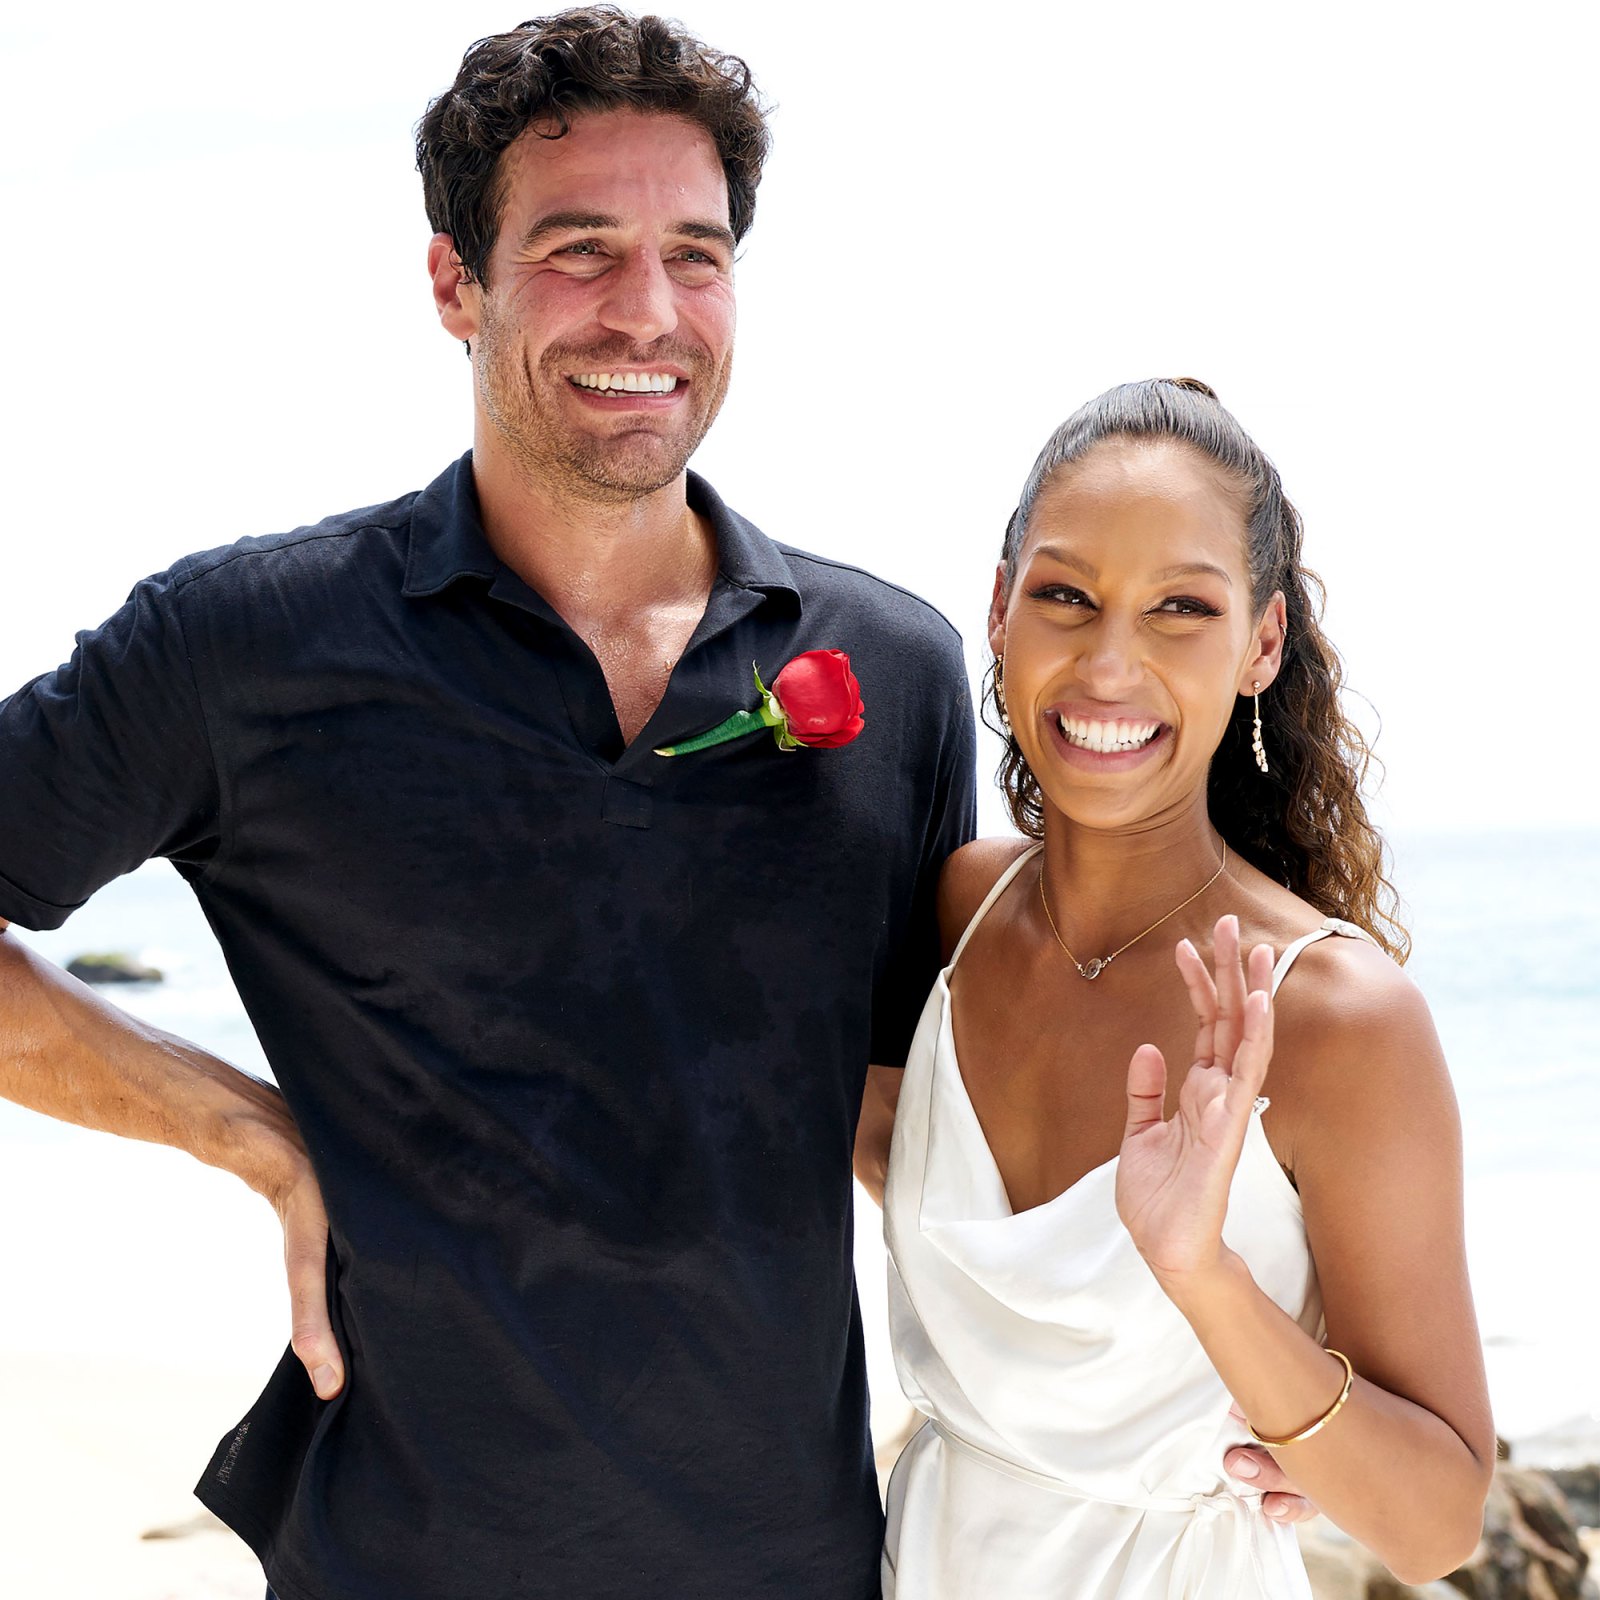 ‘Bachelor in Paradise’ Couples Who Are Still Together